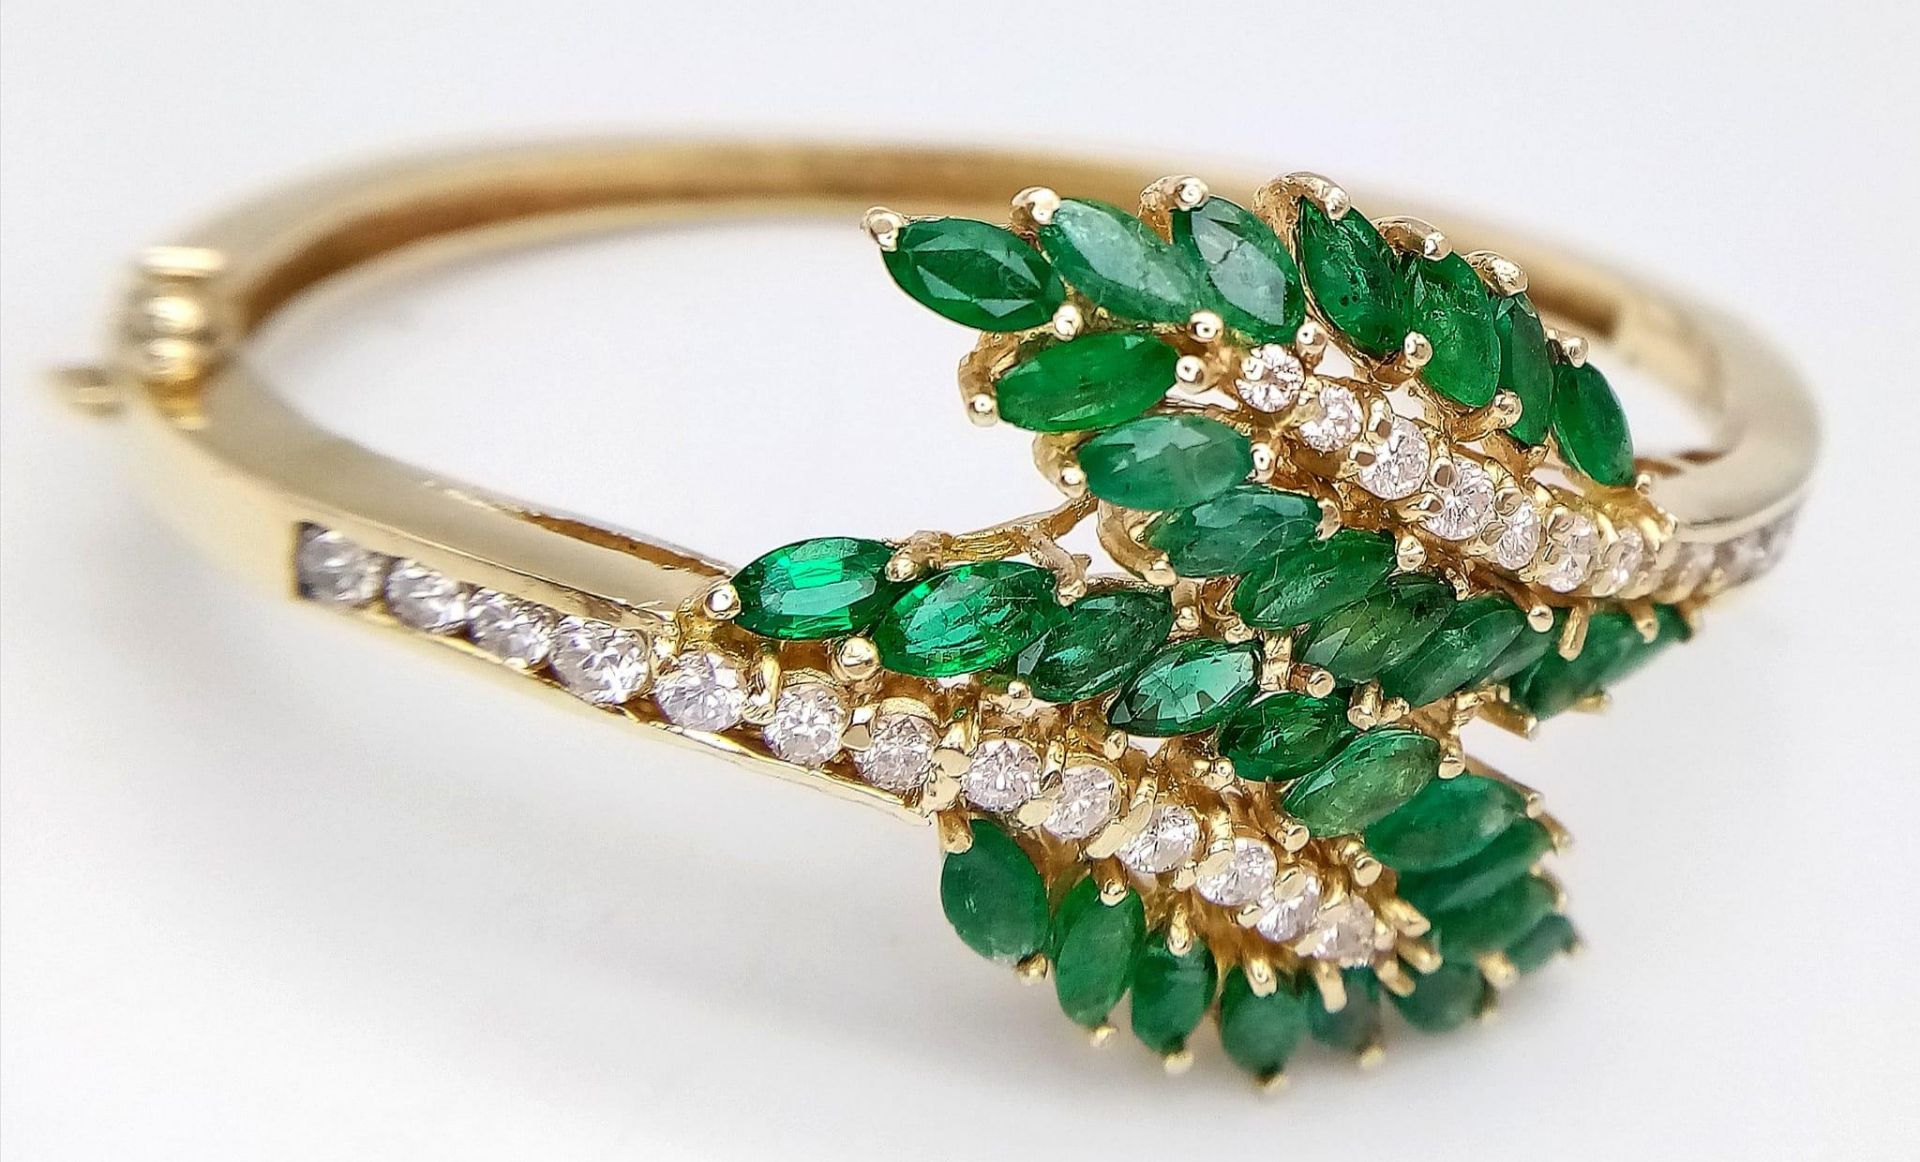 A DIAMOND AND EMERALD LEAF DESIGN BANGLE IN CROSSOVER STYLE SET IN18K GOLD . 33.5gms 10457 - Bild 3 aus 15